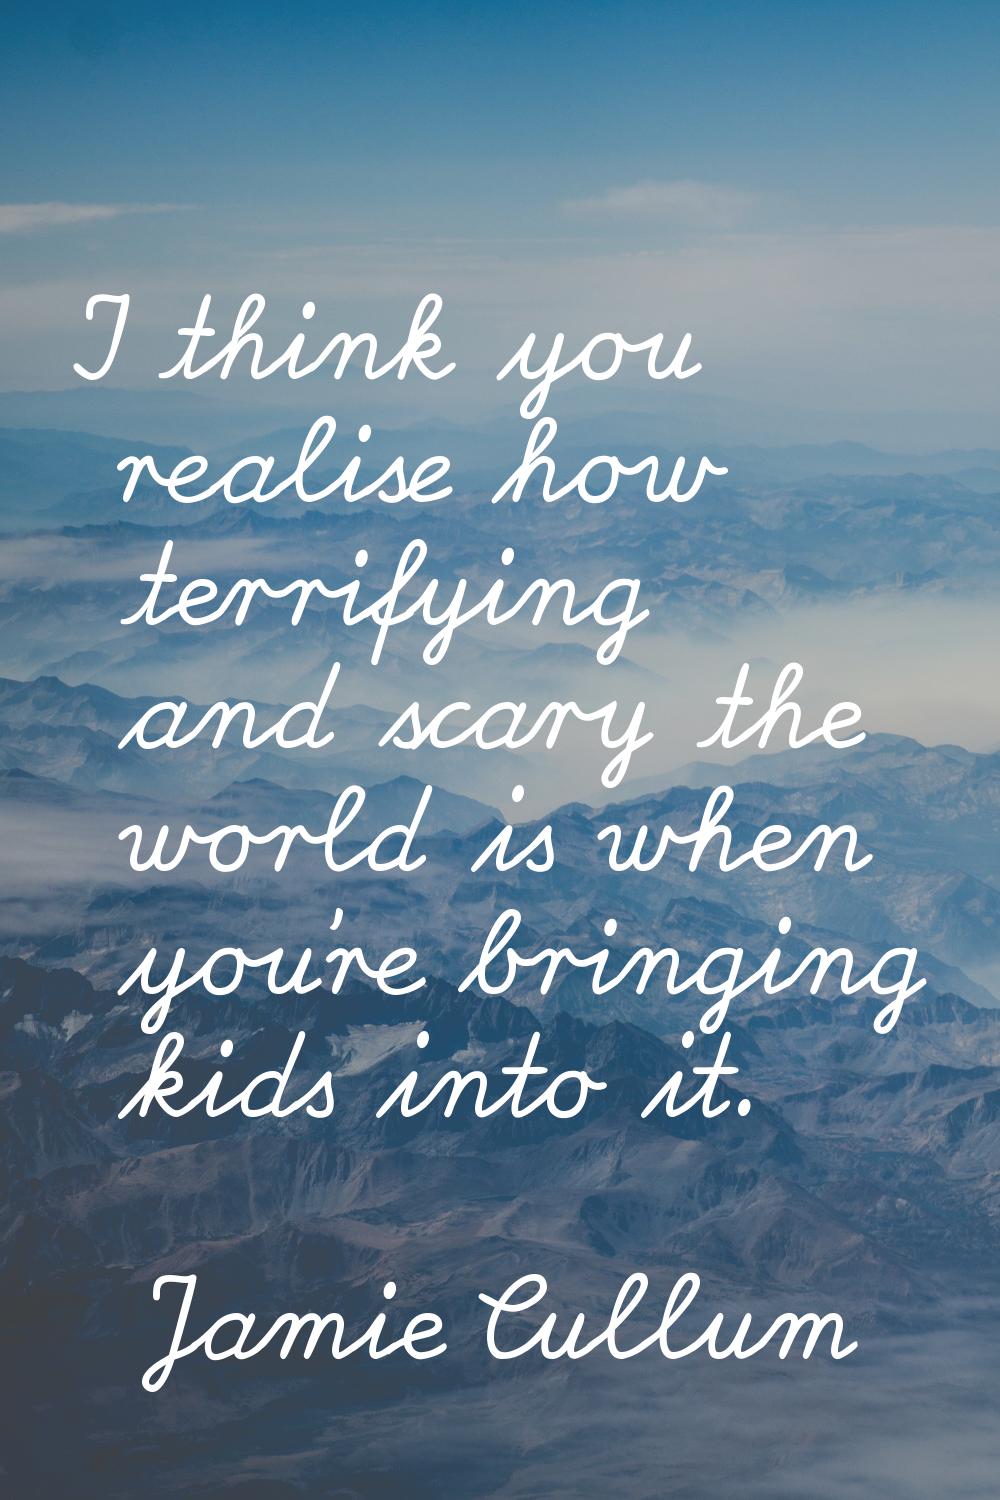 I think you realise how terrifying and scary the world is when you're bringing kids into it.